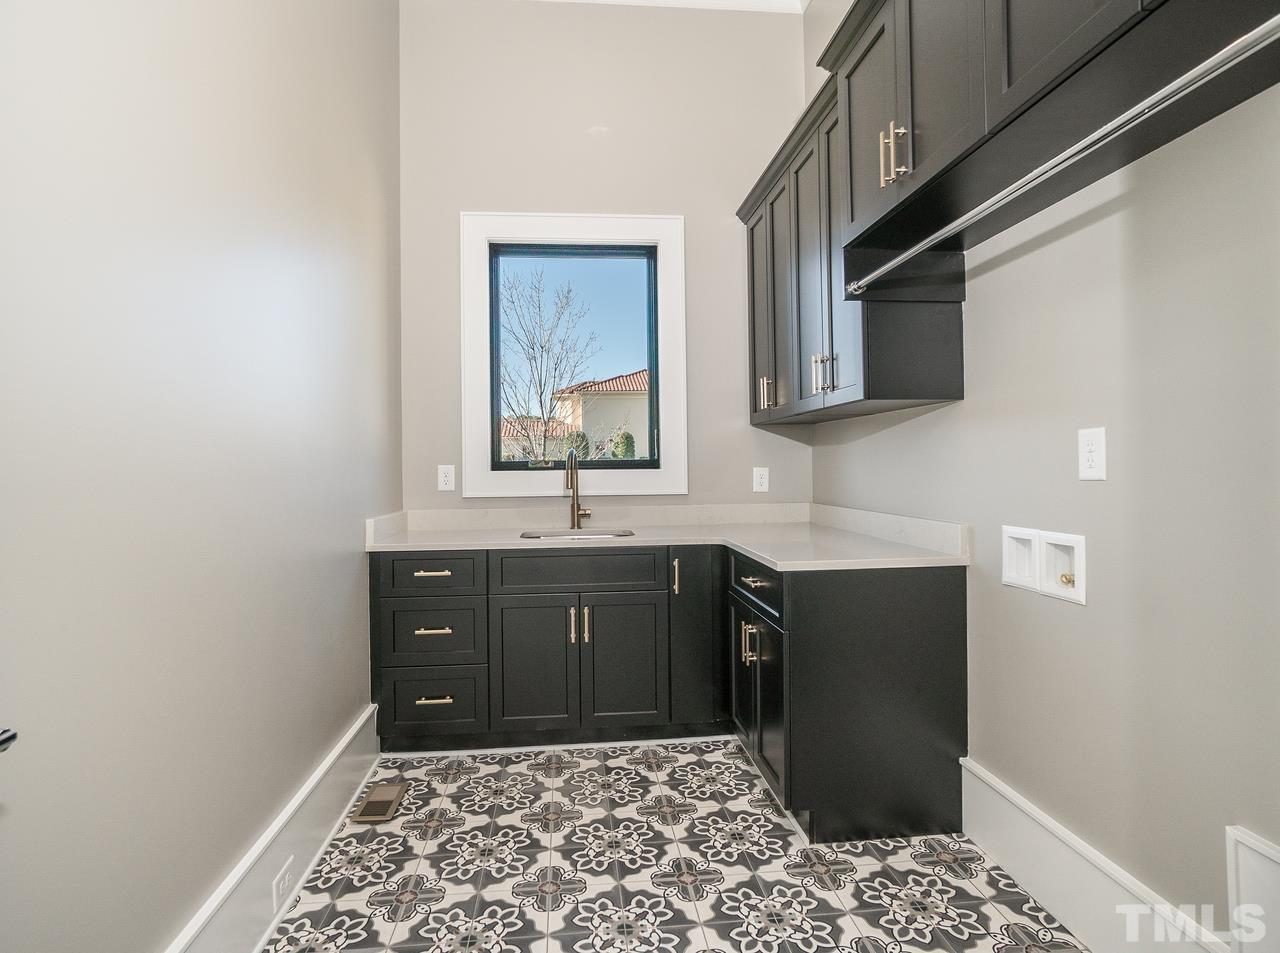 Laundry Room with Tile Floor and Custom Cabinetry